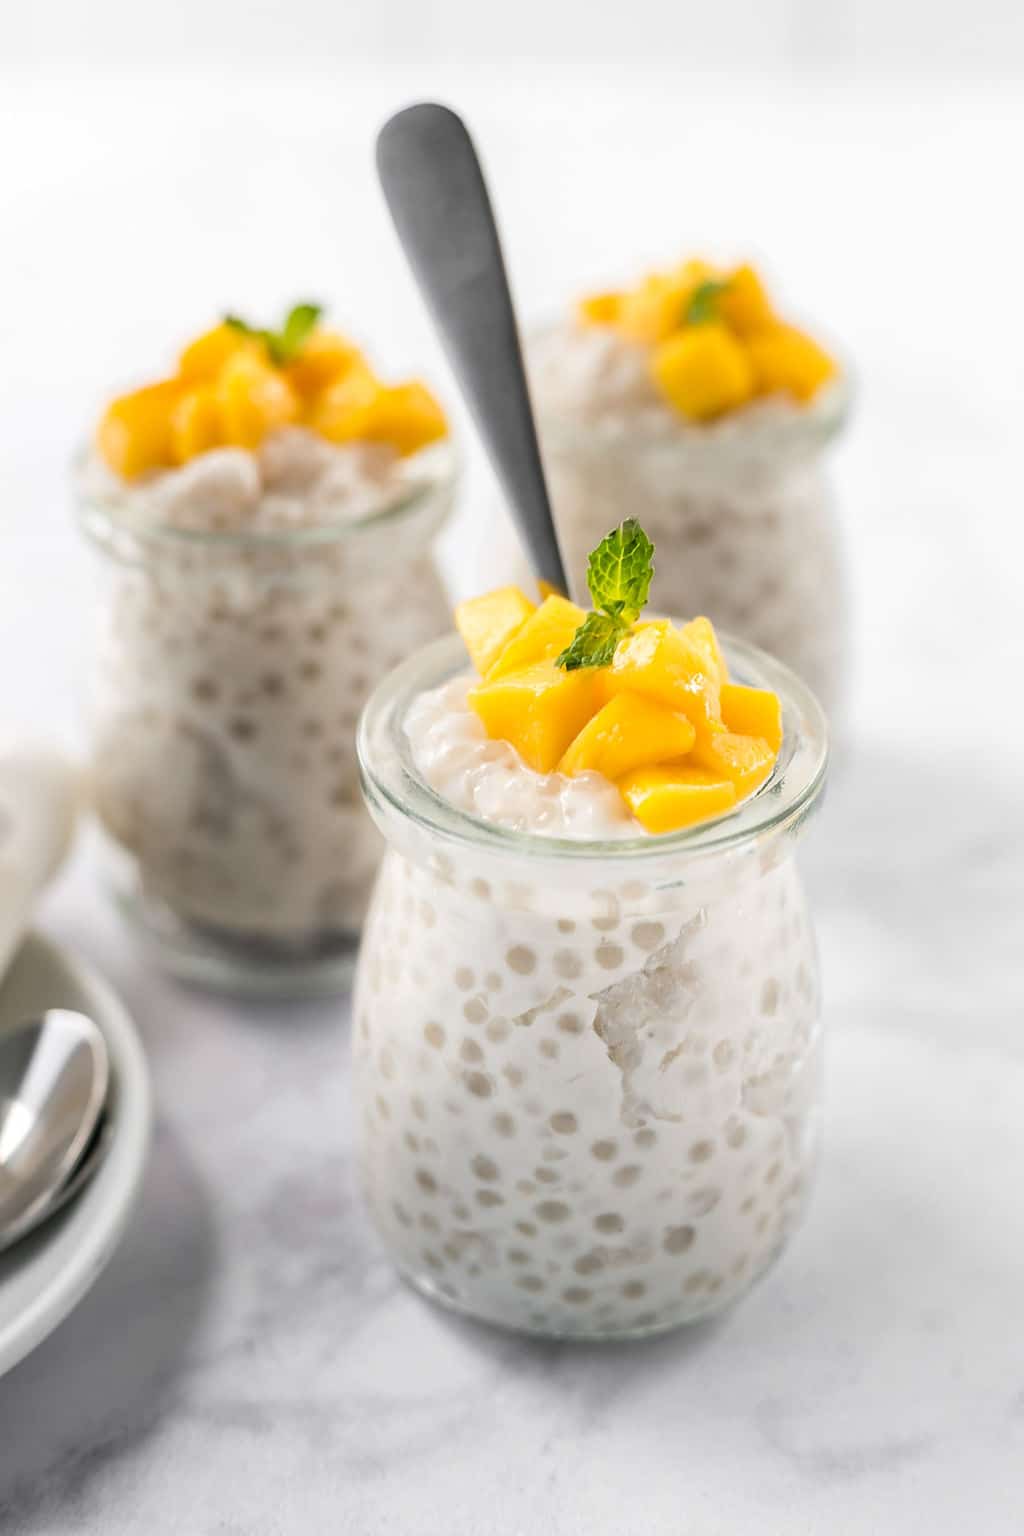 Easy Dairy-Free Tapioca Pudding in small glass jars topped with mango and a sprig of green mint.